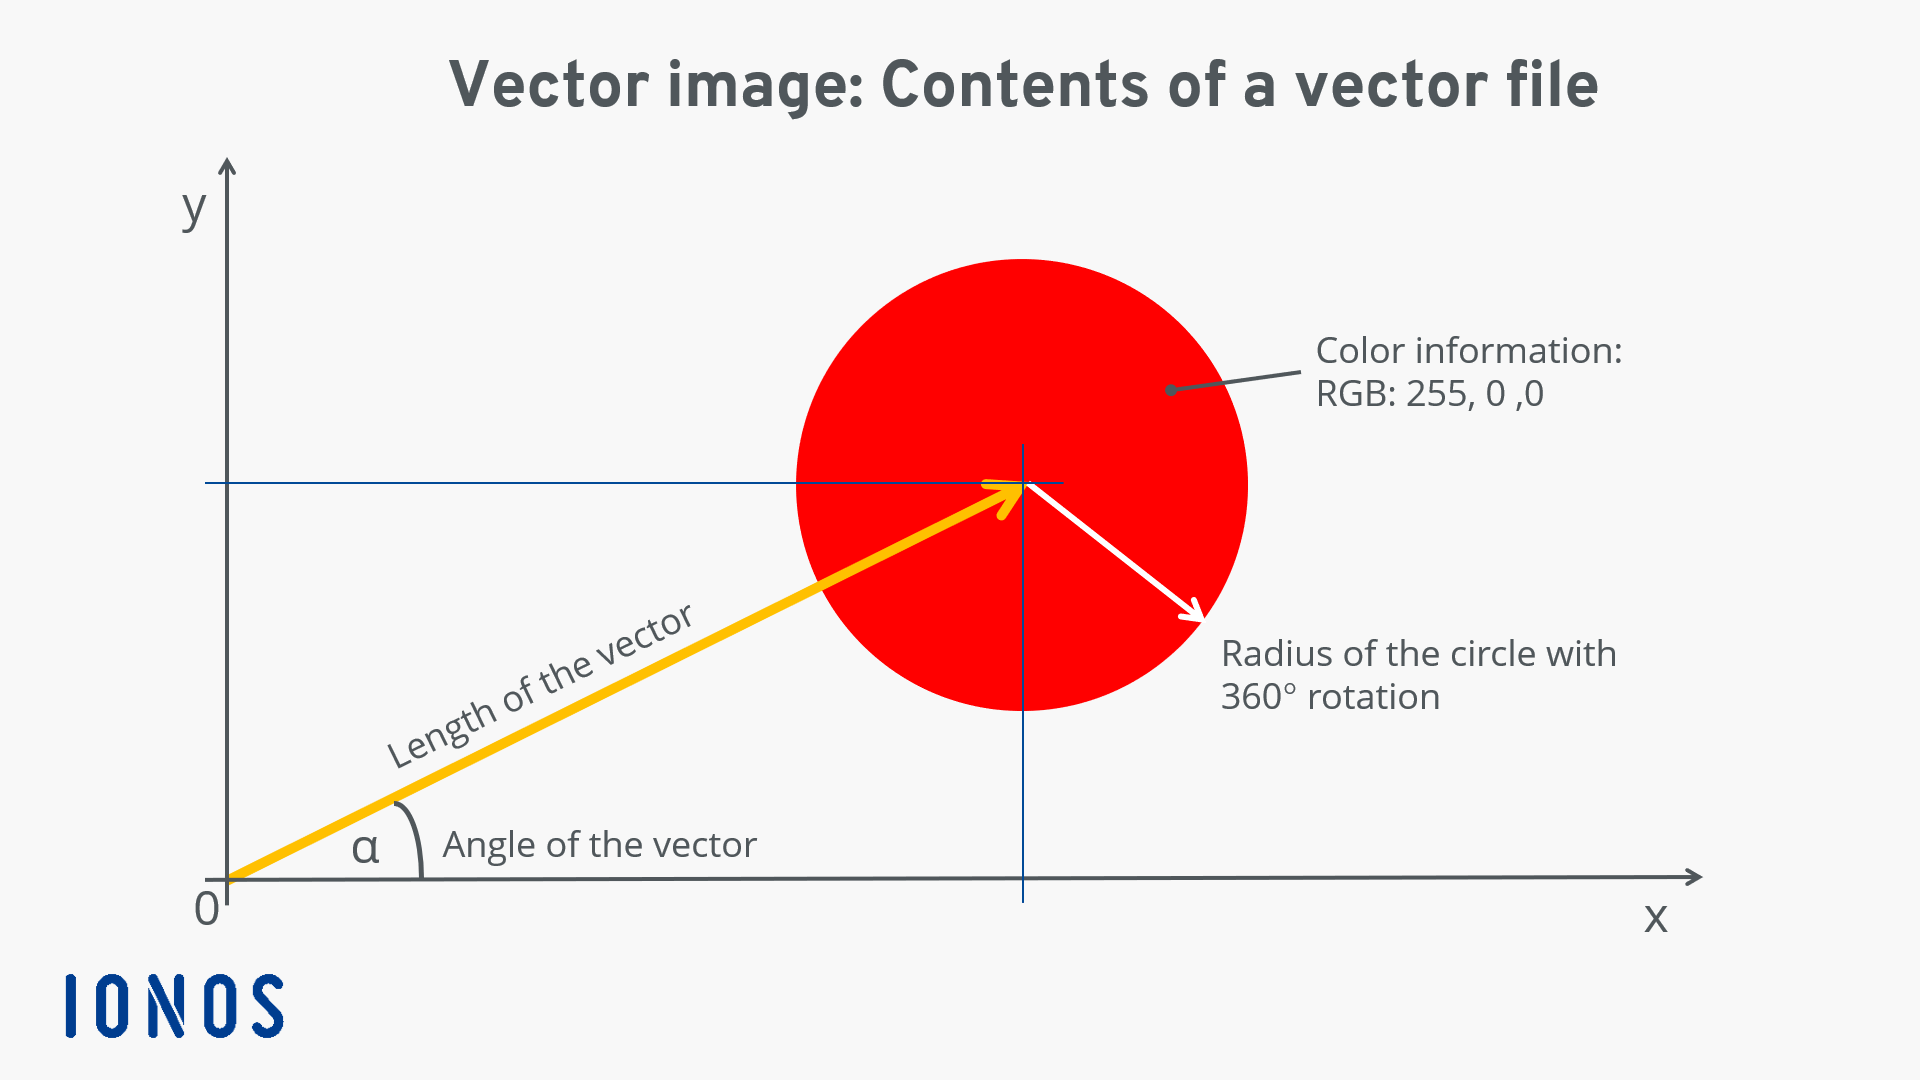 Illustration of the data necessary for building a vector image